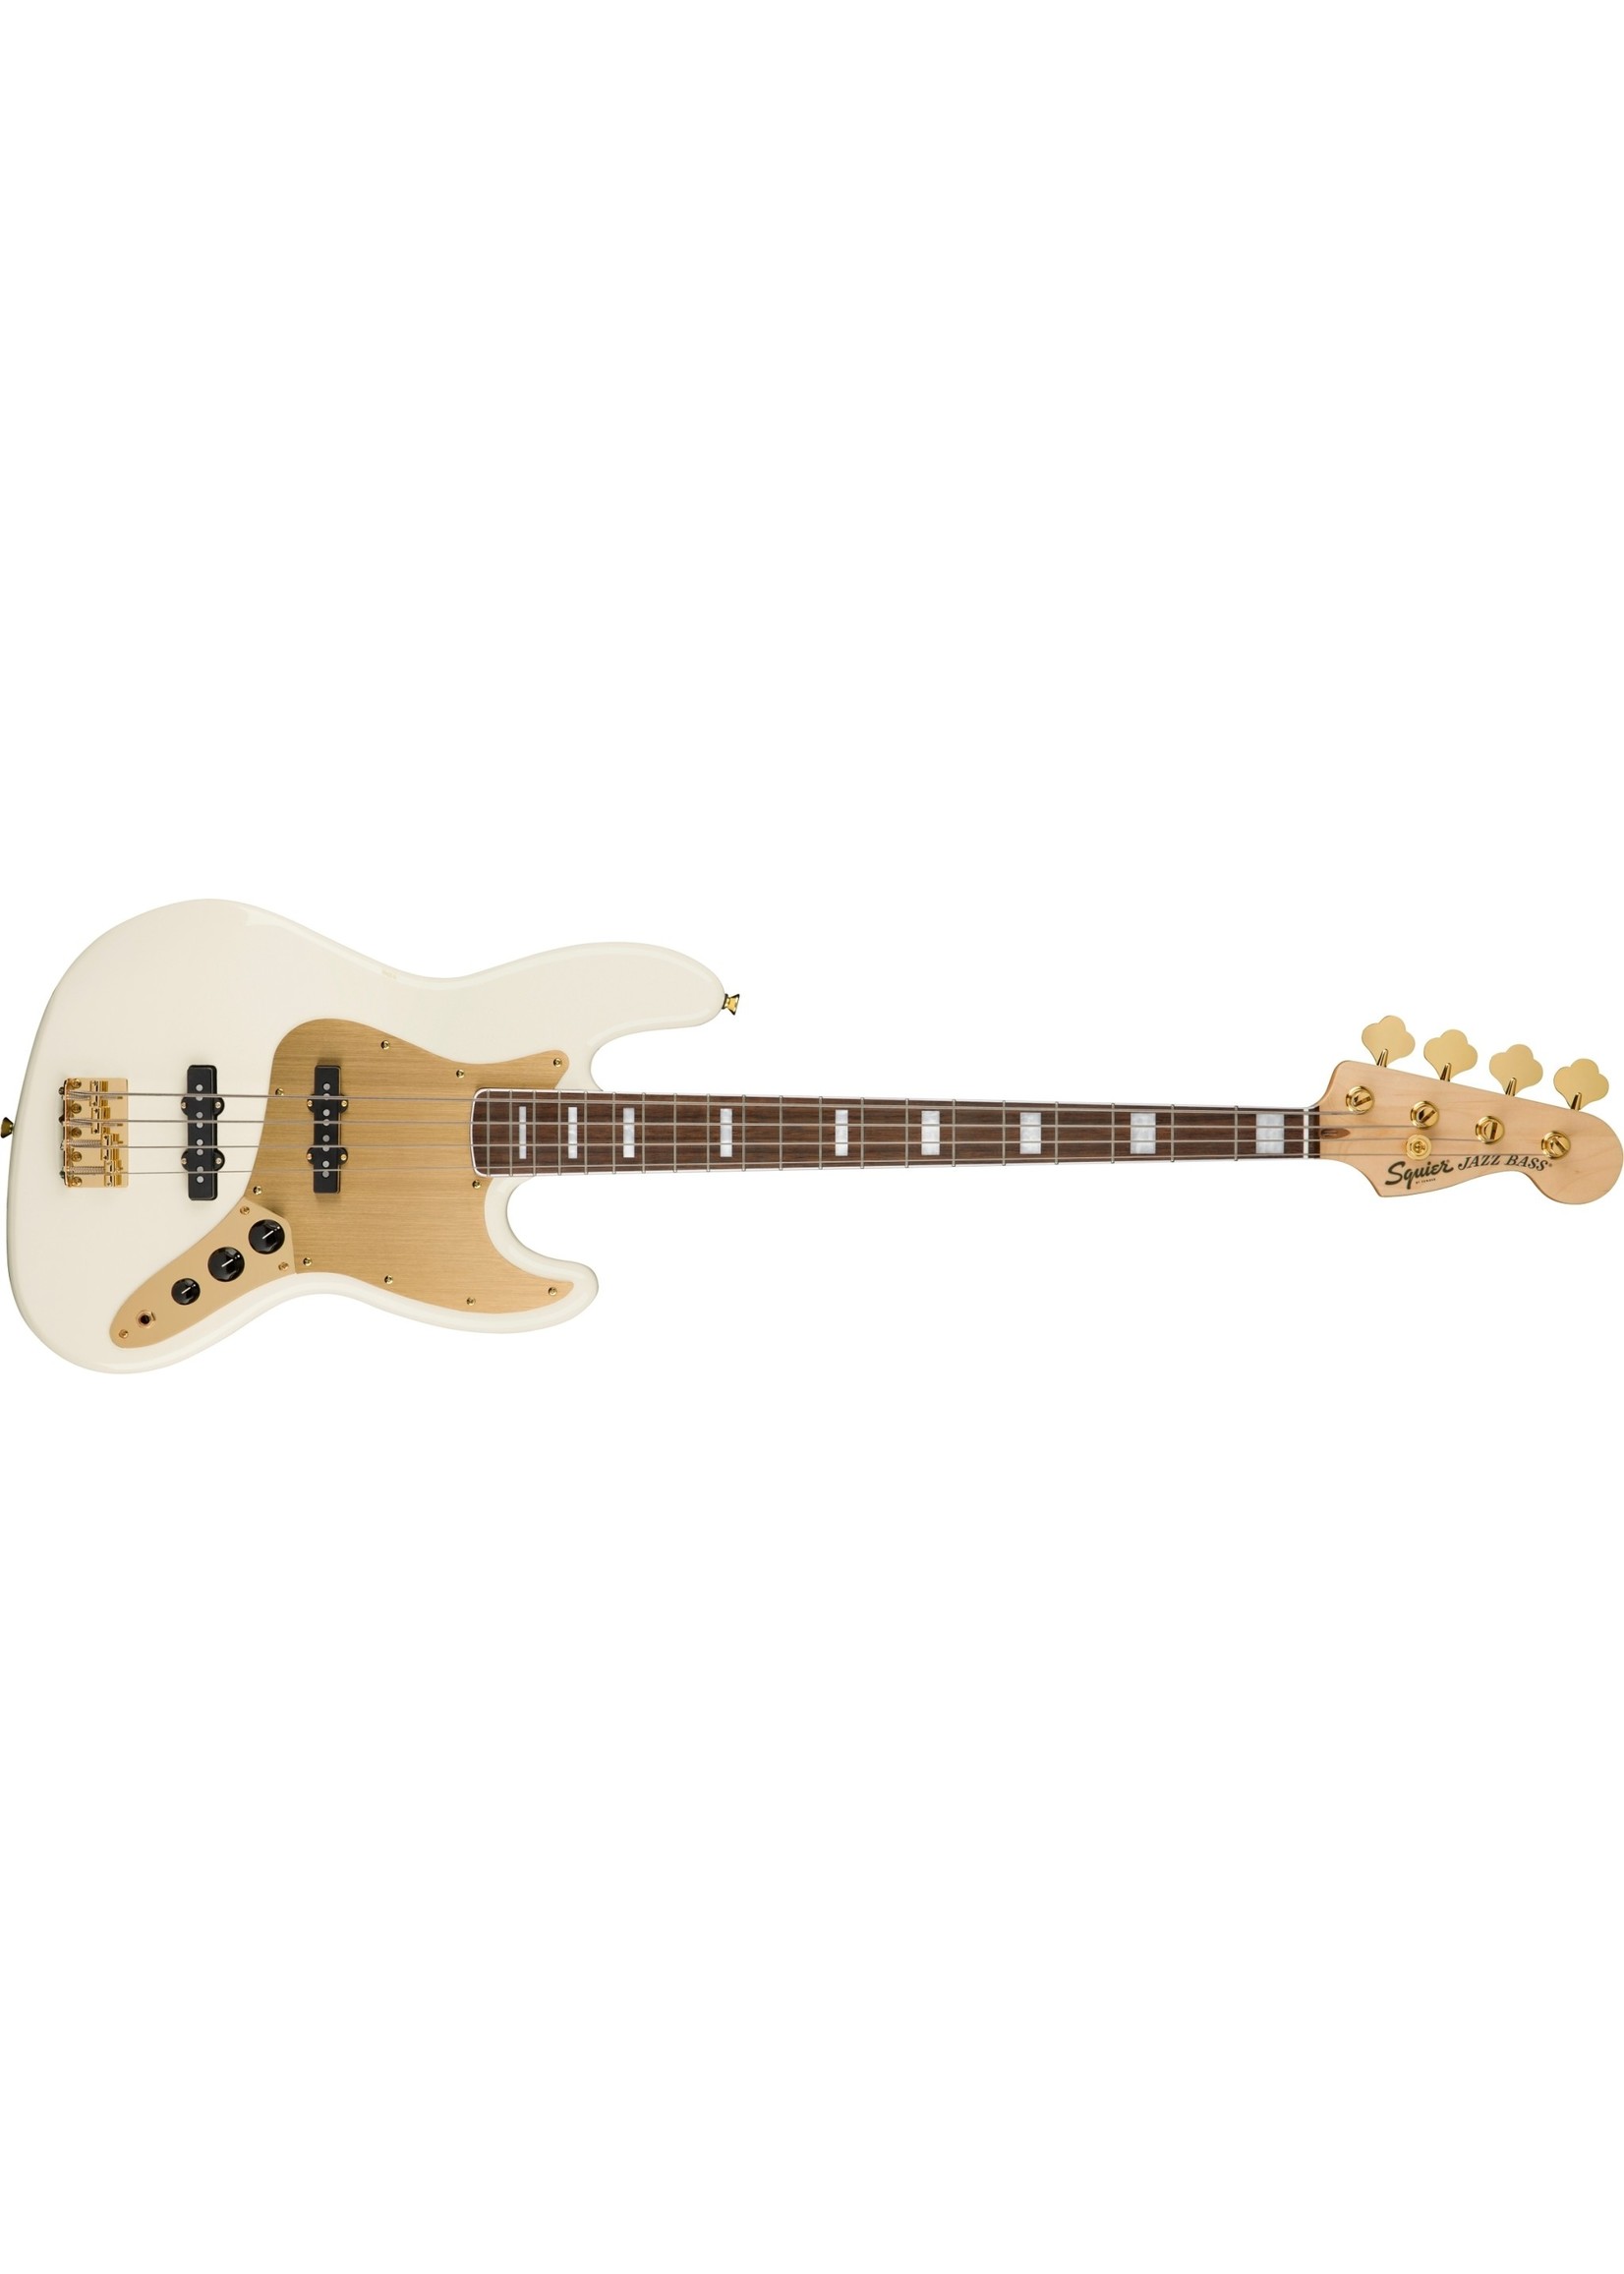 Squier Squier 40th Anniversary Jazz Bass, Gold Edition, Laurel Fingerboard, Gold Anodized Pickguard, Olympic White